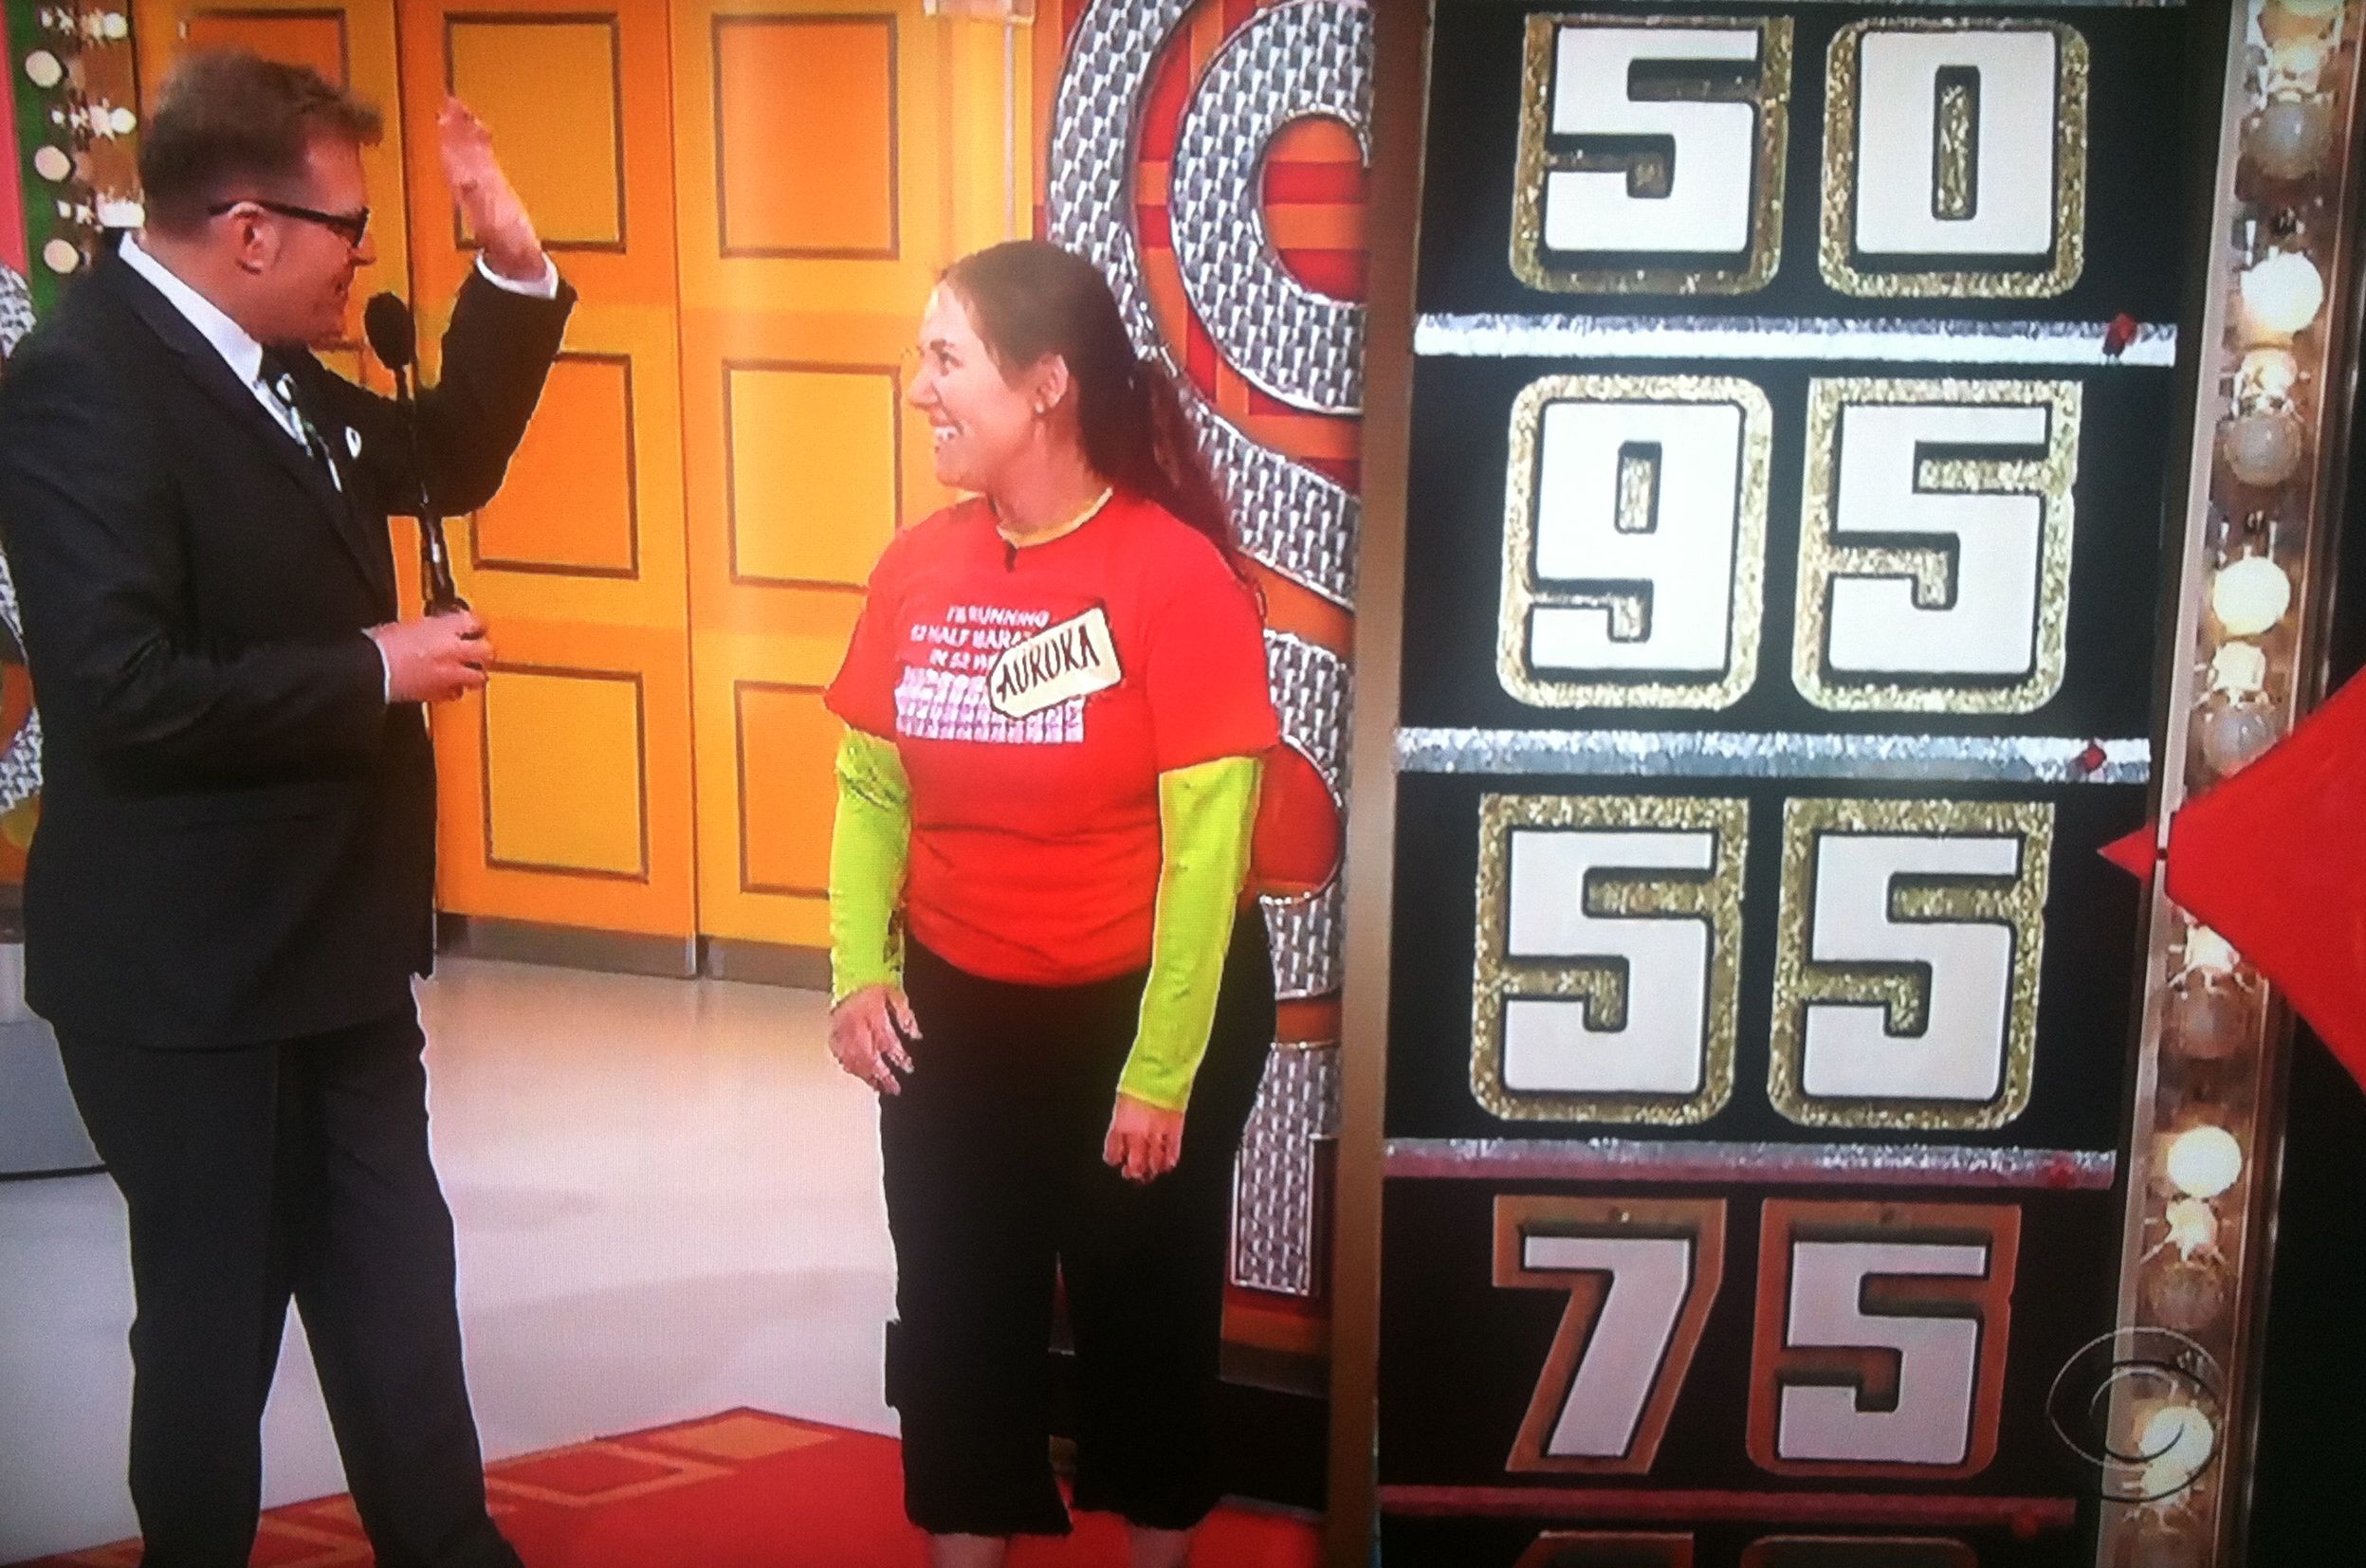 Drew Carey extending a high 5 to Aurora De Lucia on The Price is Right